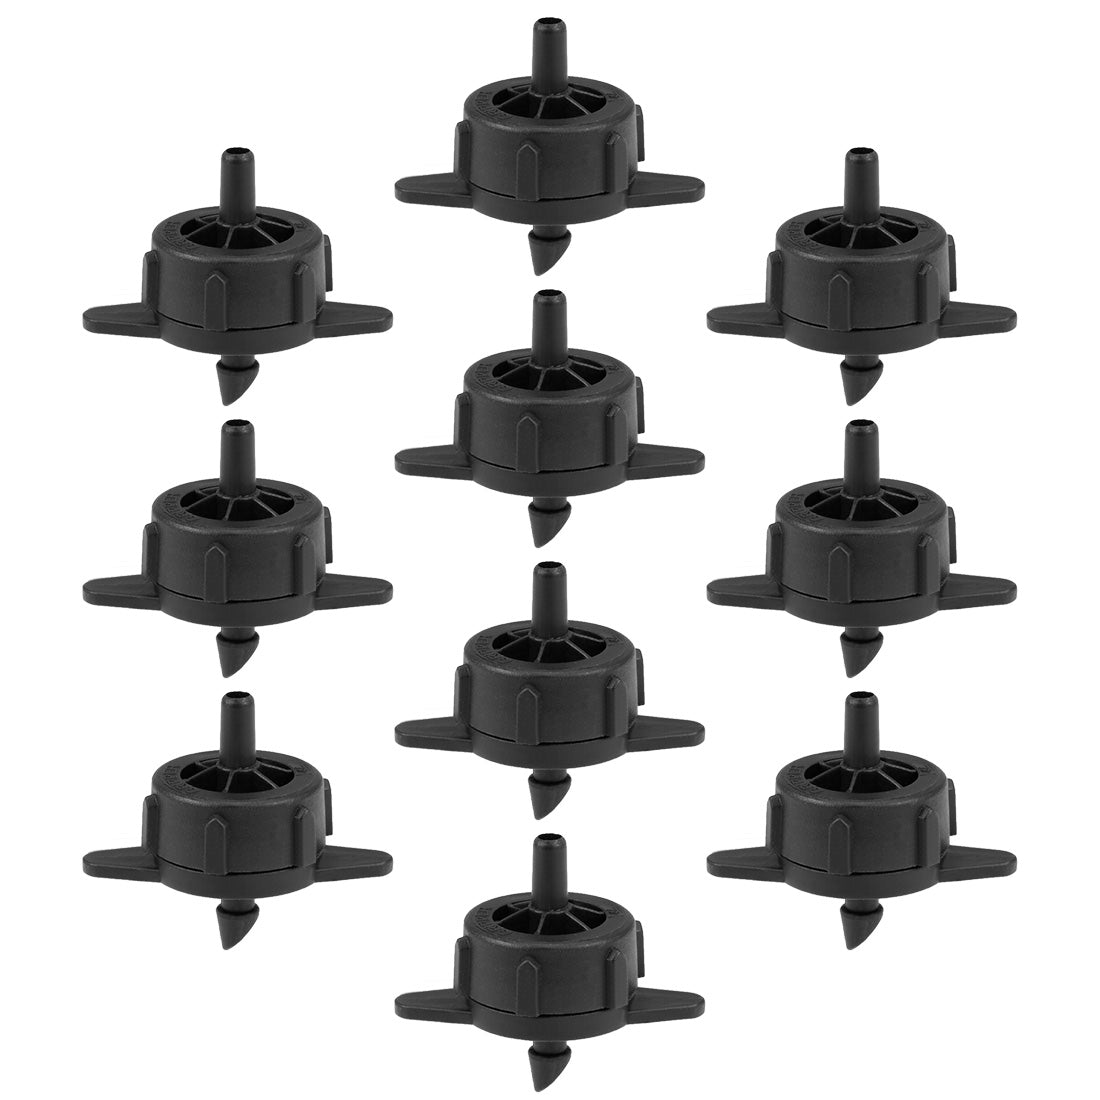 uxcell Uxcell Pressure Compensating Dripper 1 GPH 4L/H Emitter for Garden Lawn Drip Irrigation with Barbed Hose Connector Black 25pcs